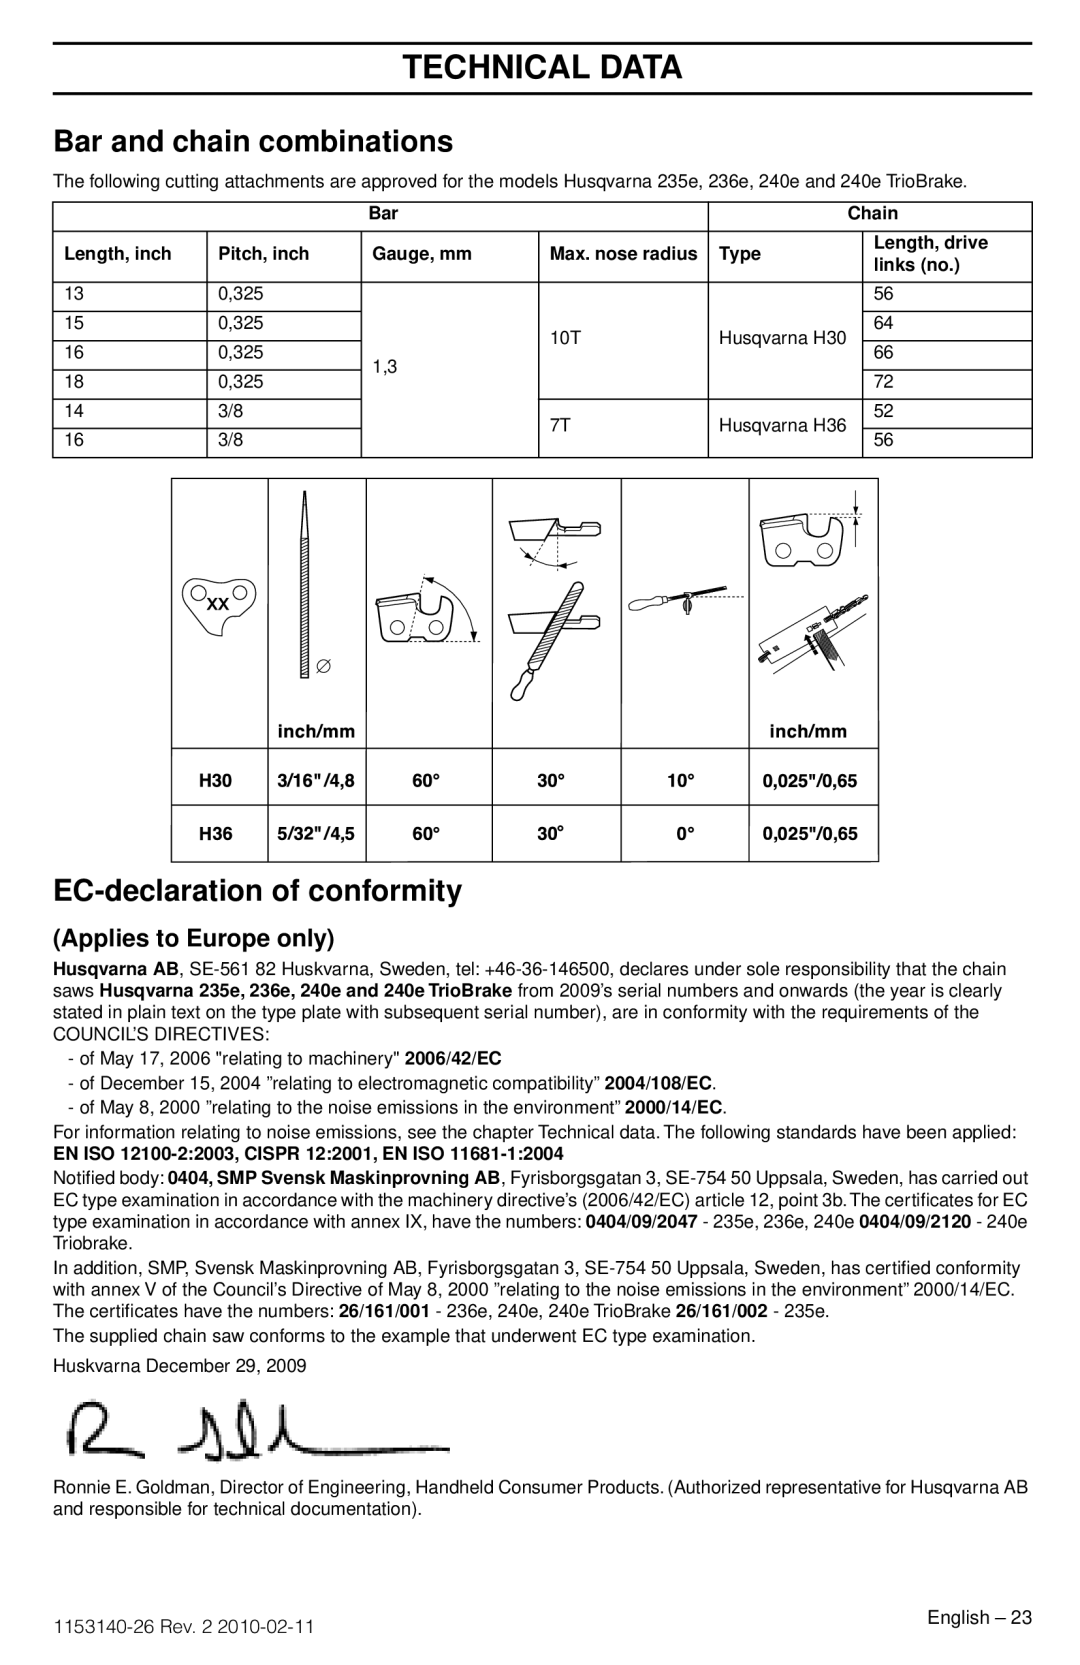 Husqvarna 236E Bar and chain combinations, EC-declarationof conformity, Applies to Europe only, Technical Data 